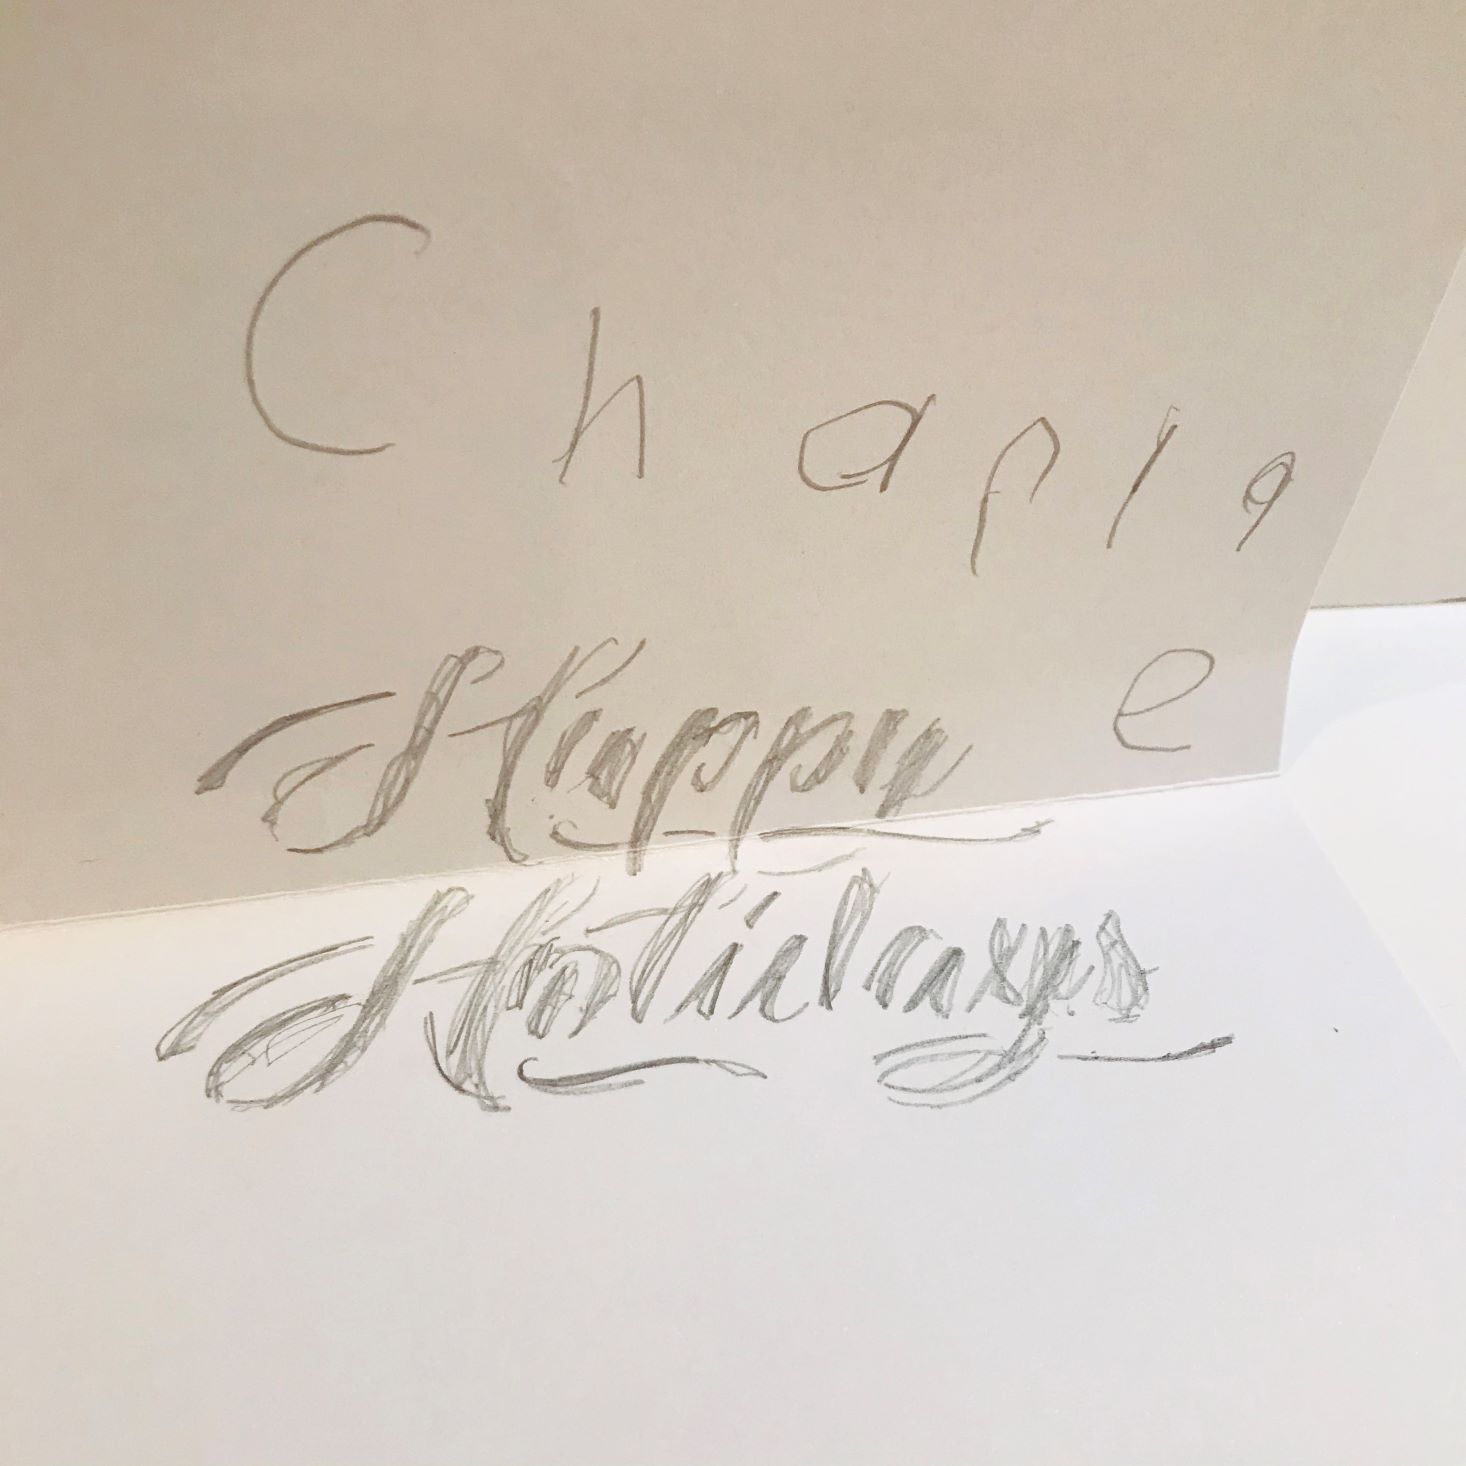 Adults and Crafts December 2019 charlies stencil